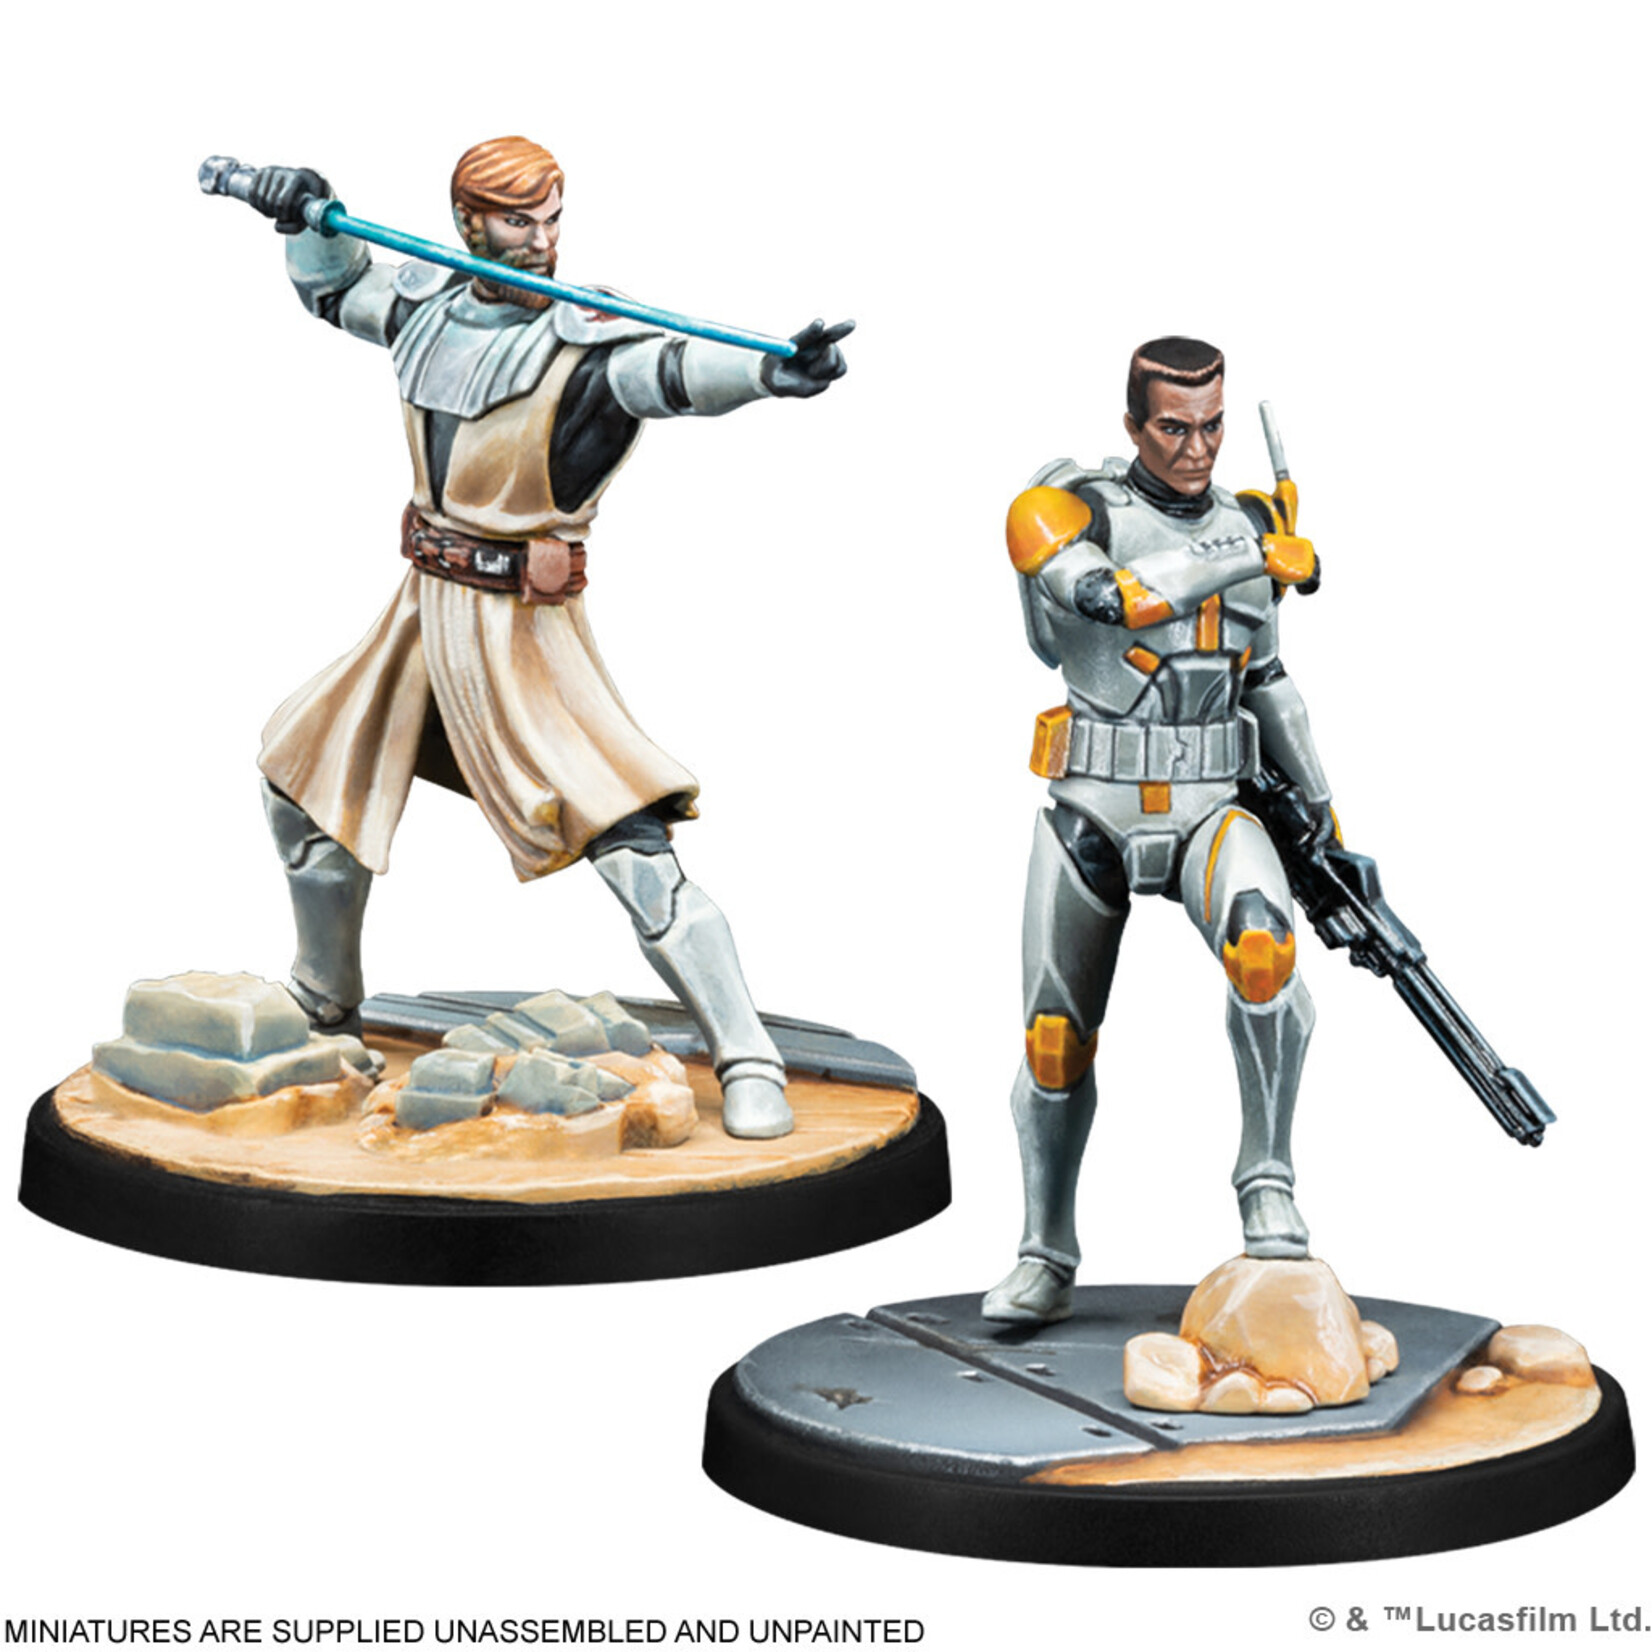 Atomic Mass Games Star Wars: Shatterpoint: Hello There Squad Pack